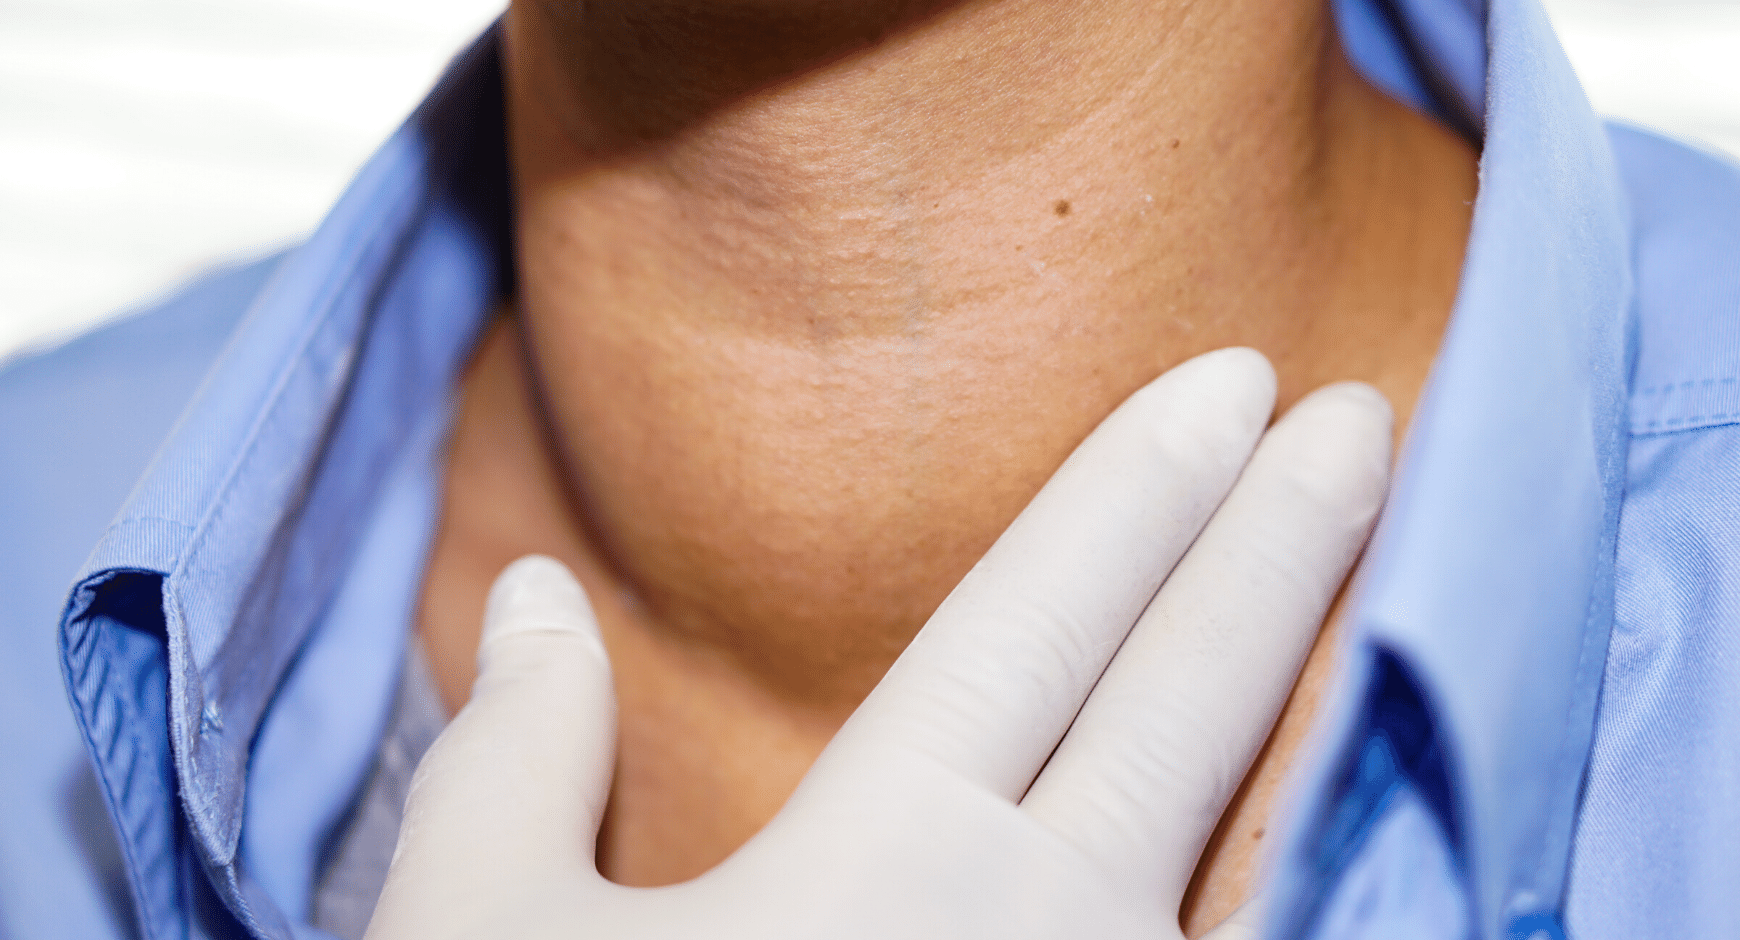 Know about thyroid functioning, tests, and treatments